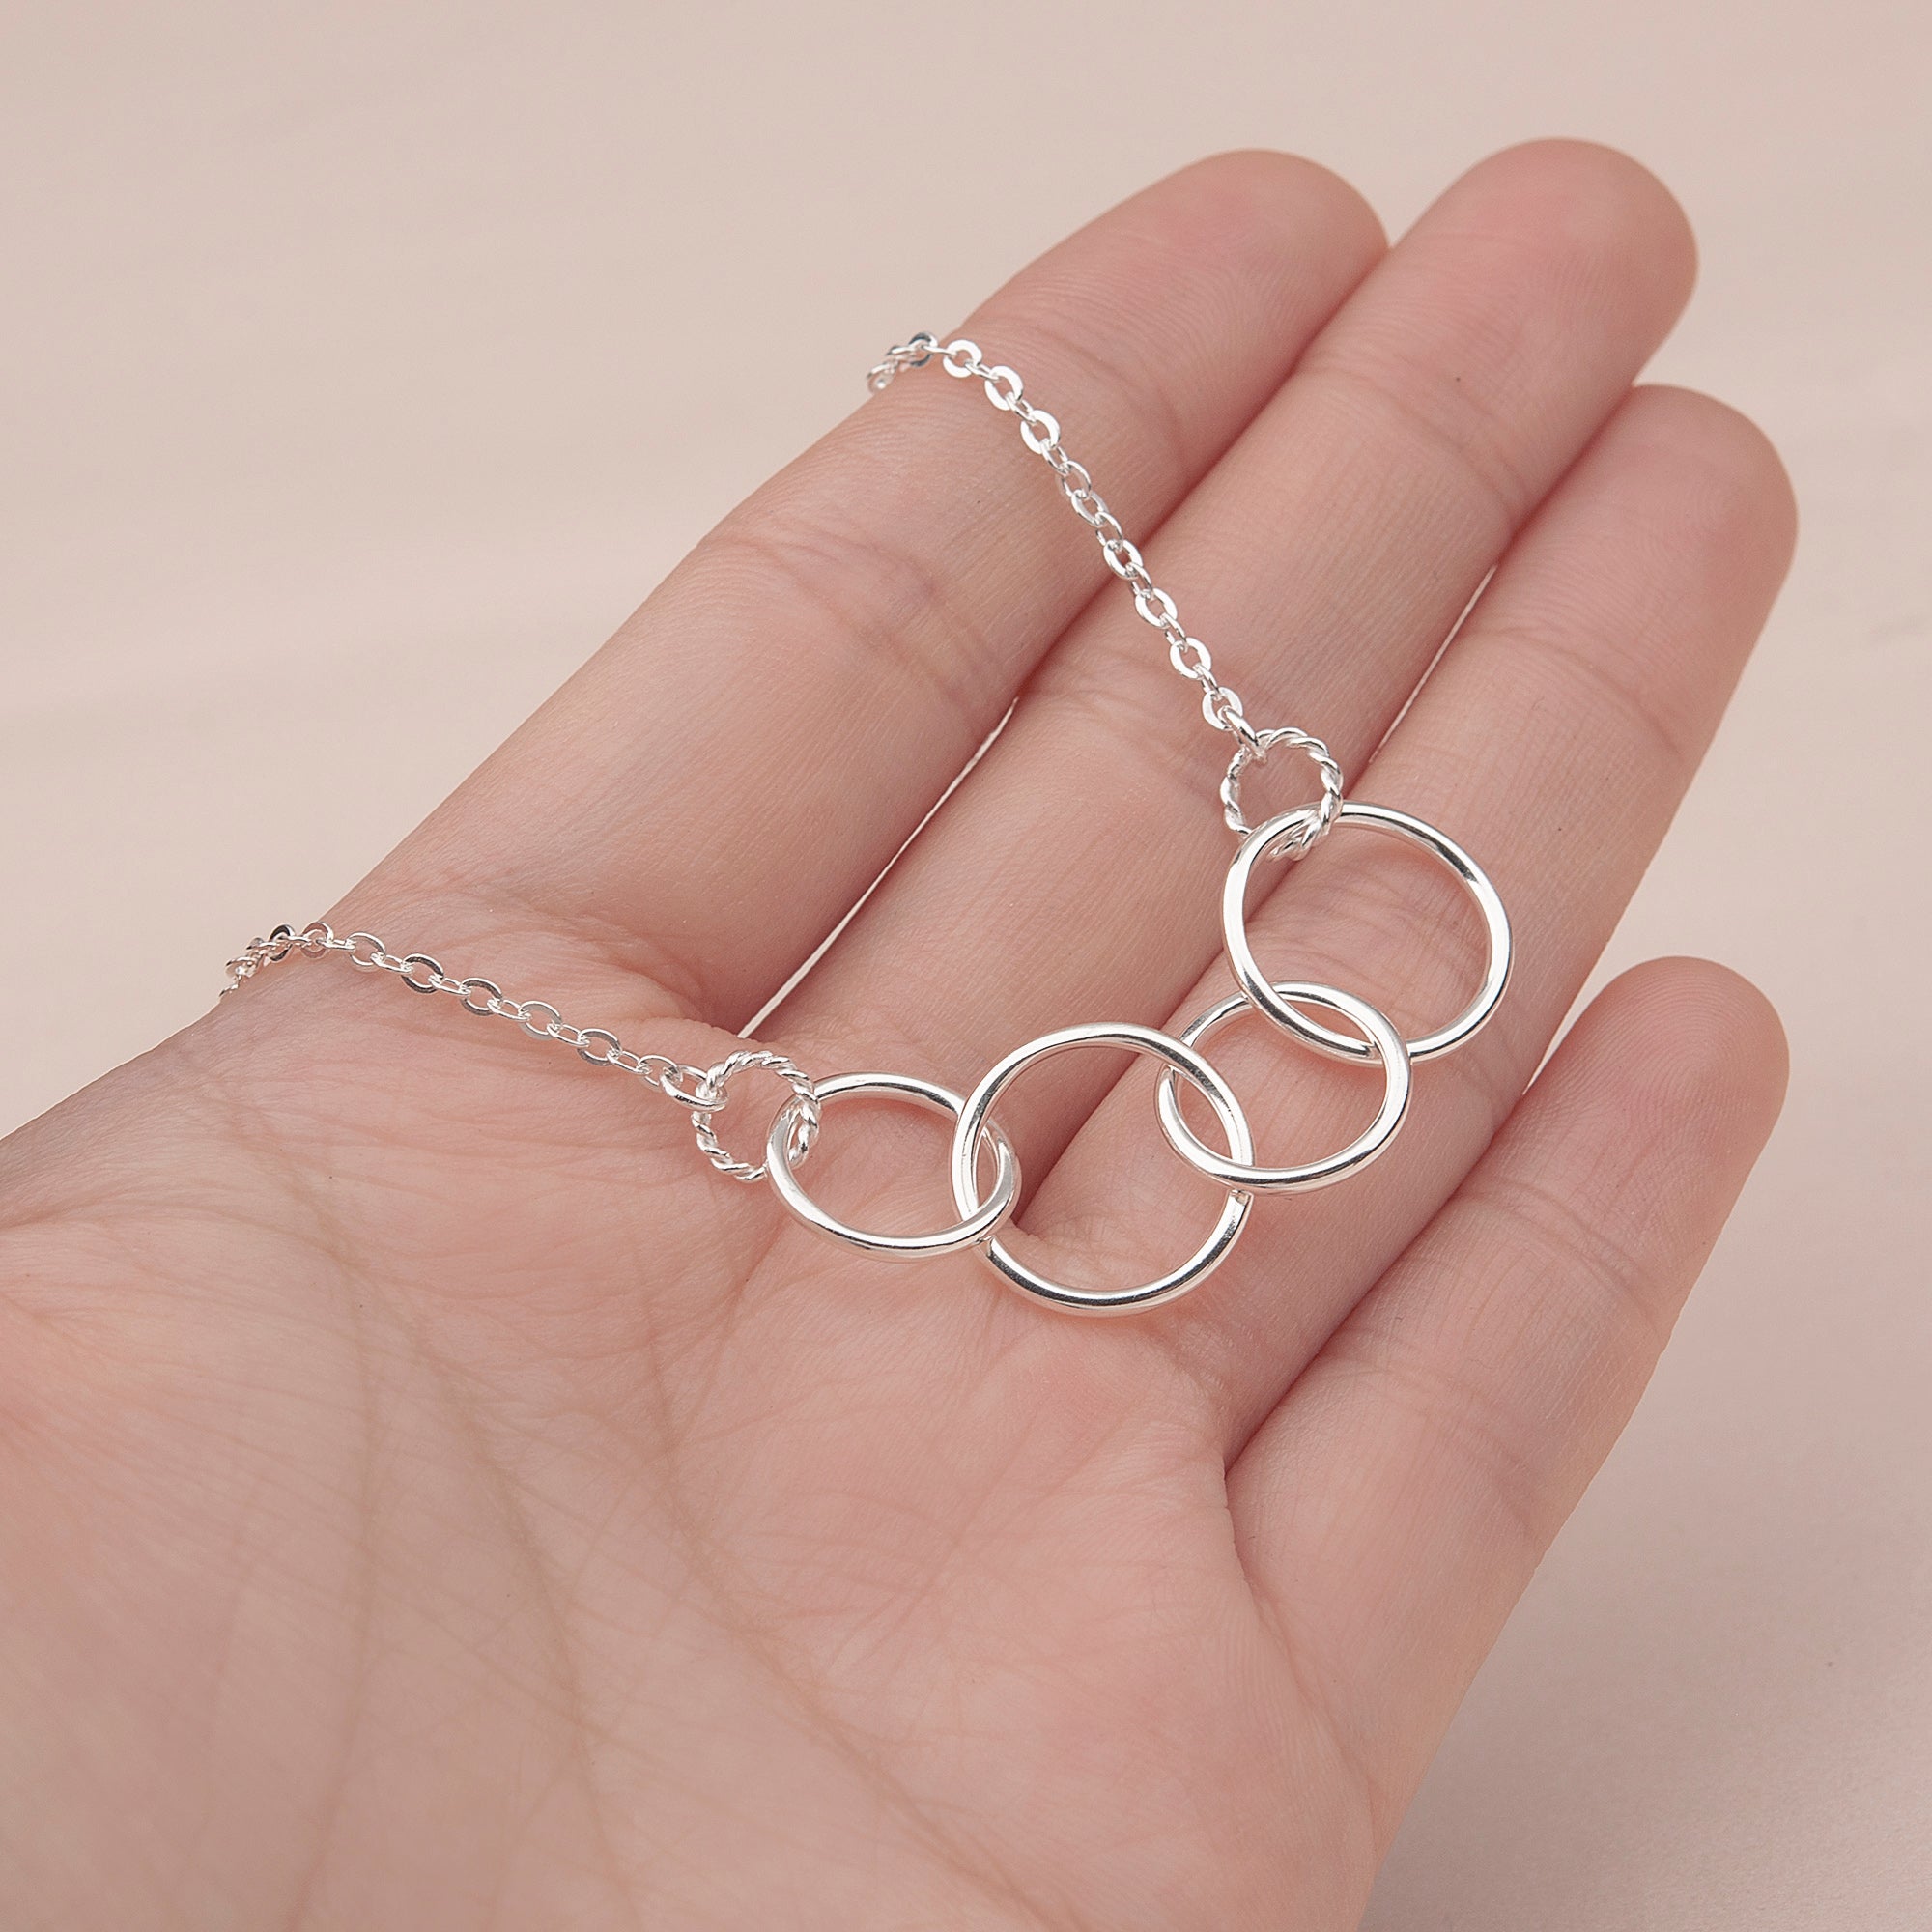 Happy 40th Birthday Necklace, Sterling Silver | Jewels 4 Girls